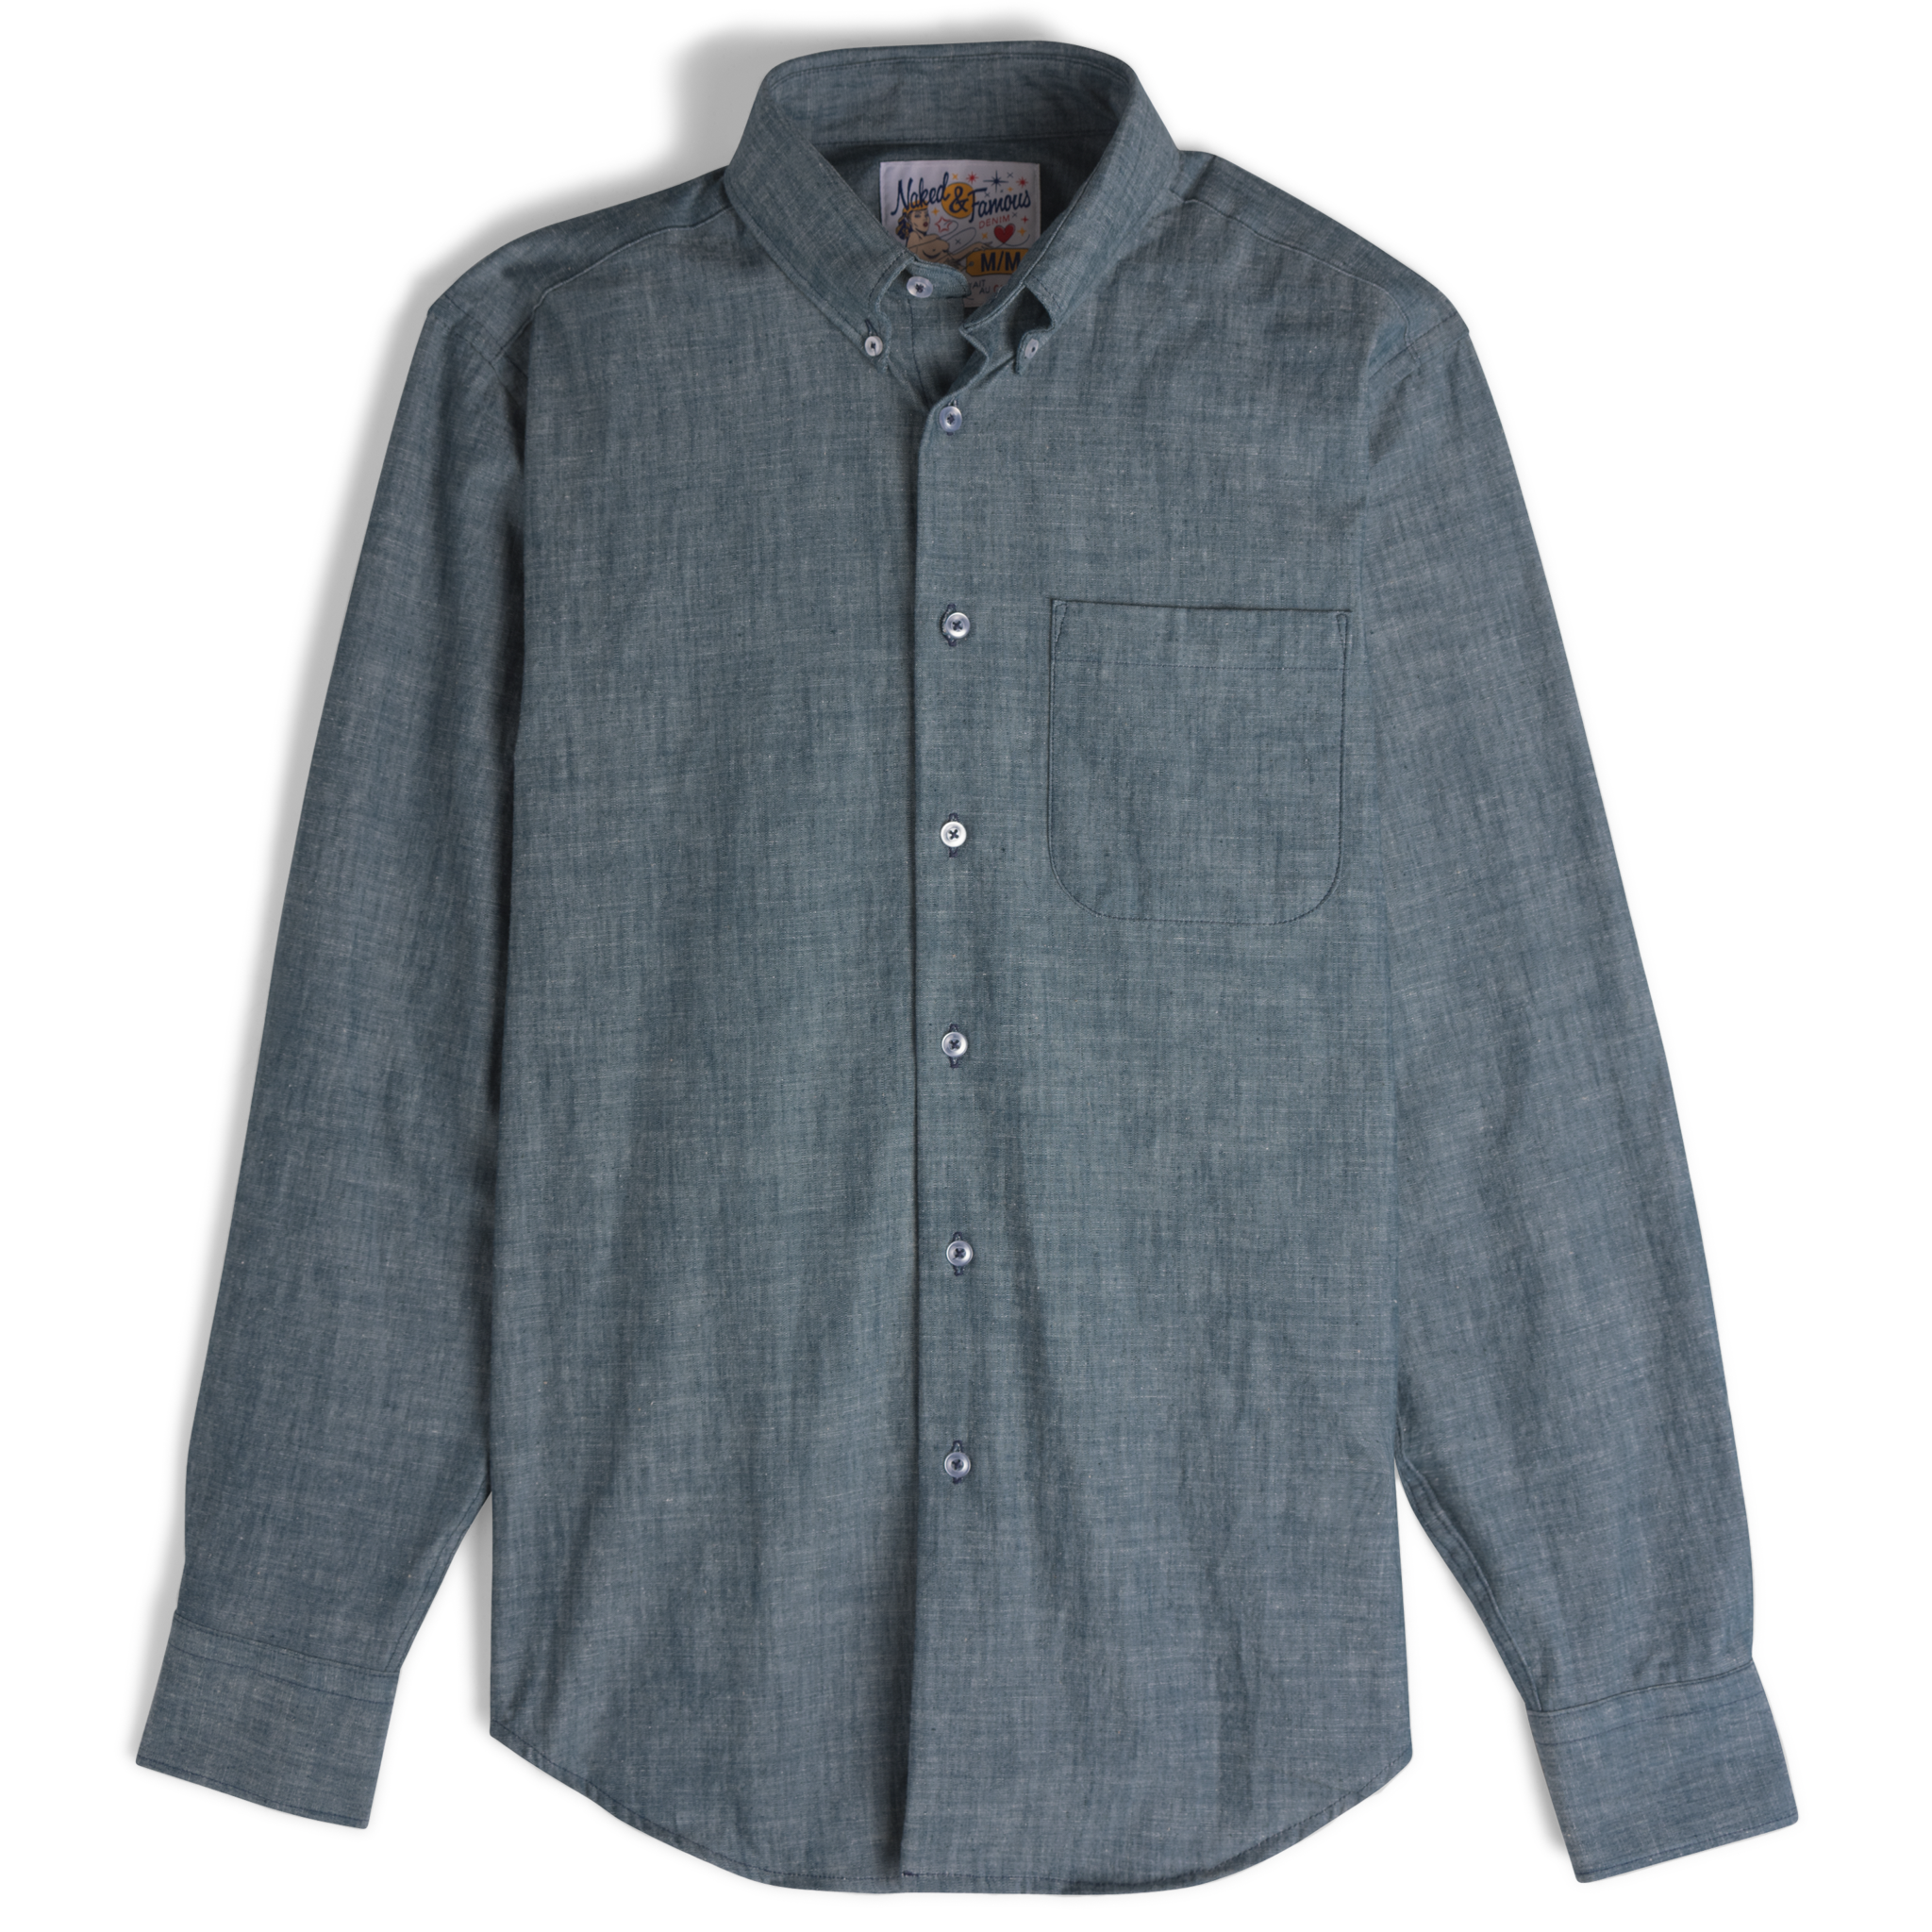  Easy Shirt - 5oz Rinsed Chambray - flat front 